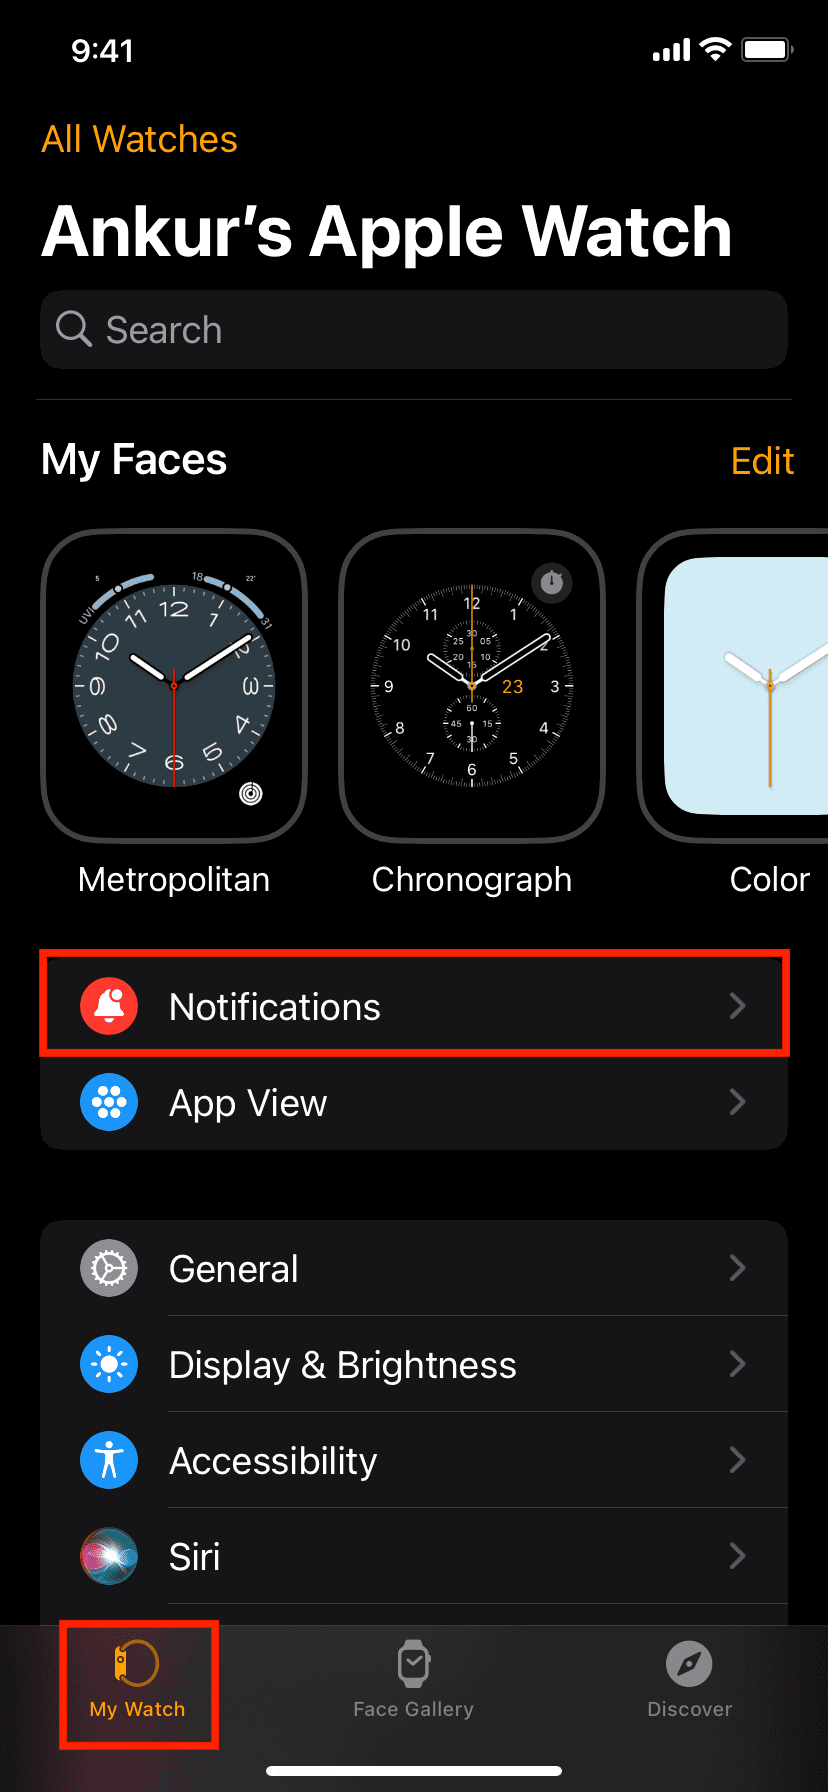 Notifications in My Watch section of iOS Watch app